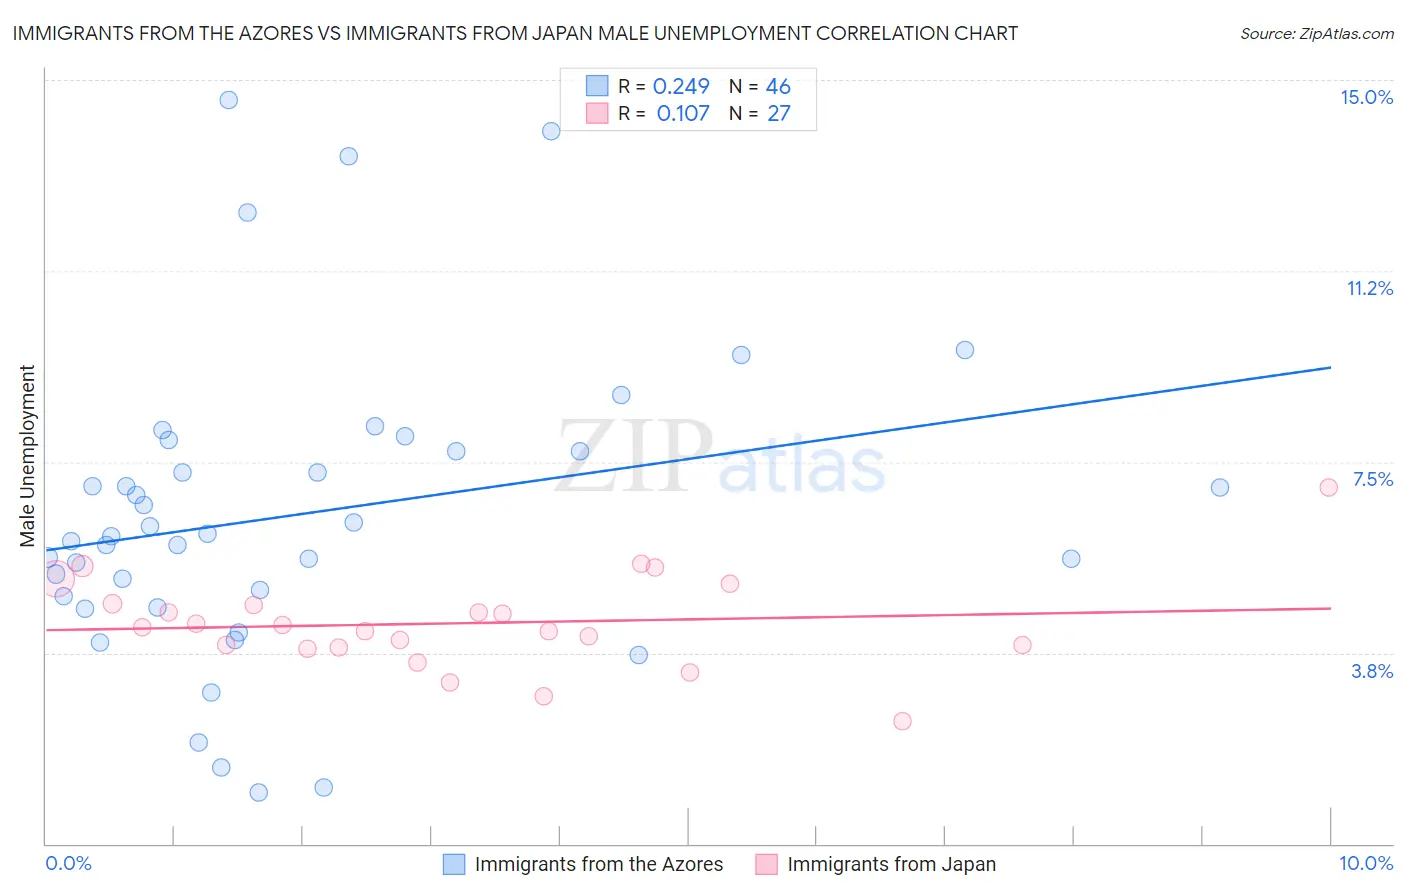 Immigrants from the Azores vs Immigrants from Japan Male Unemployment